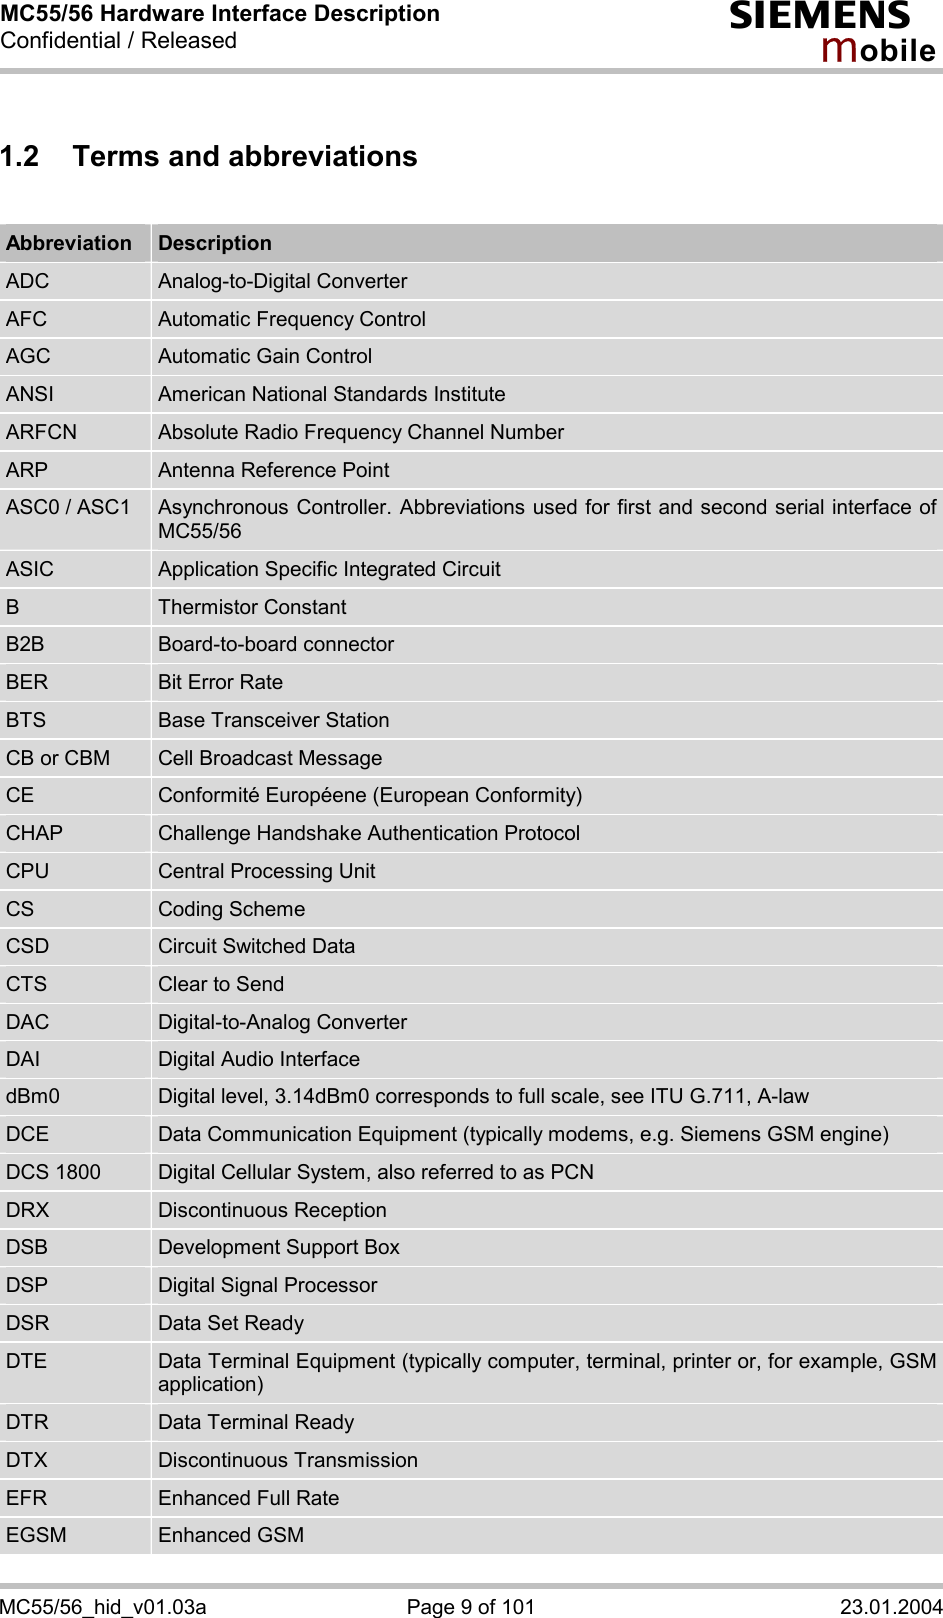 MC55/56 Hardware Interface Description Confidential / Released s mo b i l e MC55/56_hid_v01.03a  Page 9 of 101  23.01.2004 1.2  Terms and abbreviations  Abbreviation  Description ADC  Analog-to-Digital Converter AFC  Automatic Frequency Control AGC  Automatic Gain Control ANSI  American National Standards Institute ARFCN  Absolute Radio Frequency Channel Number ARP  Antenna Reference Point ASC0 / ASC1  Asynchronous Controller. Abbreviations used for first and second serial interface of MC55/56 ASIC  Application Specific Integrated Circuit B  Thermistor Constant B2B  Board-to-board connector BER  Bit Error Rate BTS  Base Transceiver Station CB or CBM  Cell Broadcast Message CE  Conformité Européene (European Conformity) CHAP  Challenge Handshake Authentication Protocol CPU  Central Processing Unit CS  Coding Scheme CSD  Circuit Switched Data CTS  Clear to Send DAC  Digital-to-Analog Converter DAI  Digital Audio Interface dBm0  Digital level, 3.14dBm0 corresponds to full scale, see ITU G.711, A-law DCE  Data Communication Equipment (typically modems, e.g. Siemens GSM engine) DCS 1800  Digital Cellular System, also referred to as PCN DRX  Discontinuous Reception DSB  Development Support Box DSP  Digital Signal Processor DSR  Data Set Ready DTE  Data Terminal Equipment (typically computer, terminal, printer or, for example, GSM application) DTR  Data Terminal Ready DTX  Discontinuous Transmission EFR  Enhanced Full Rate EGSM  Enhanced GSM 